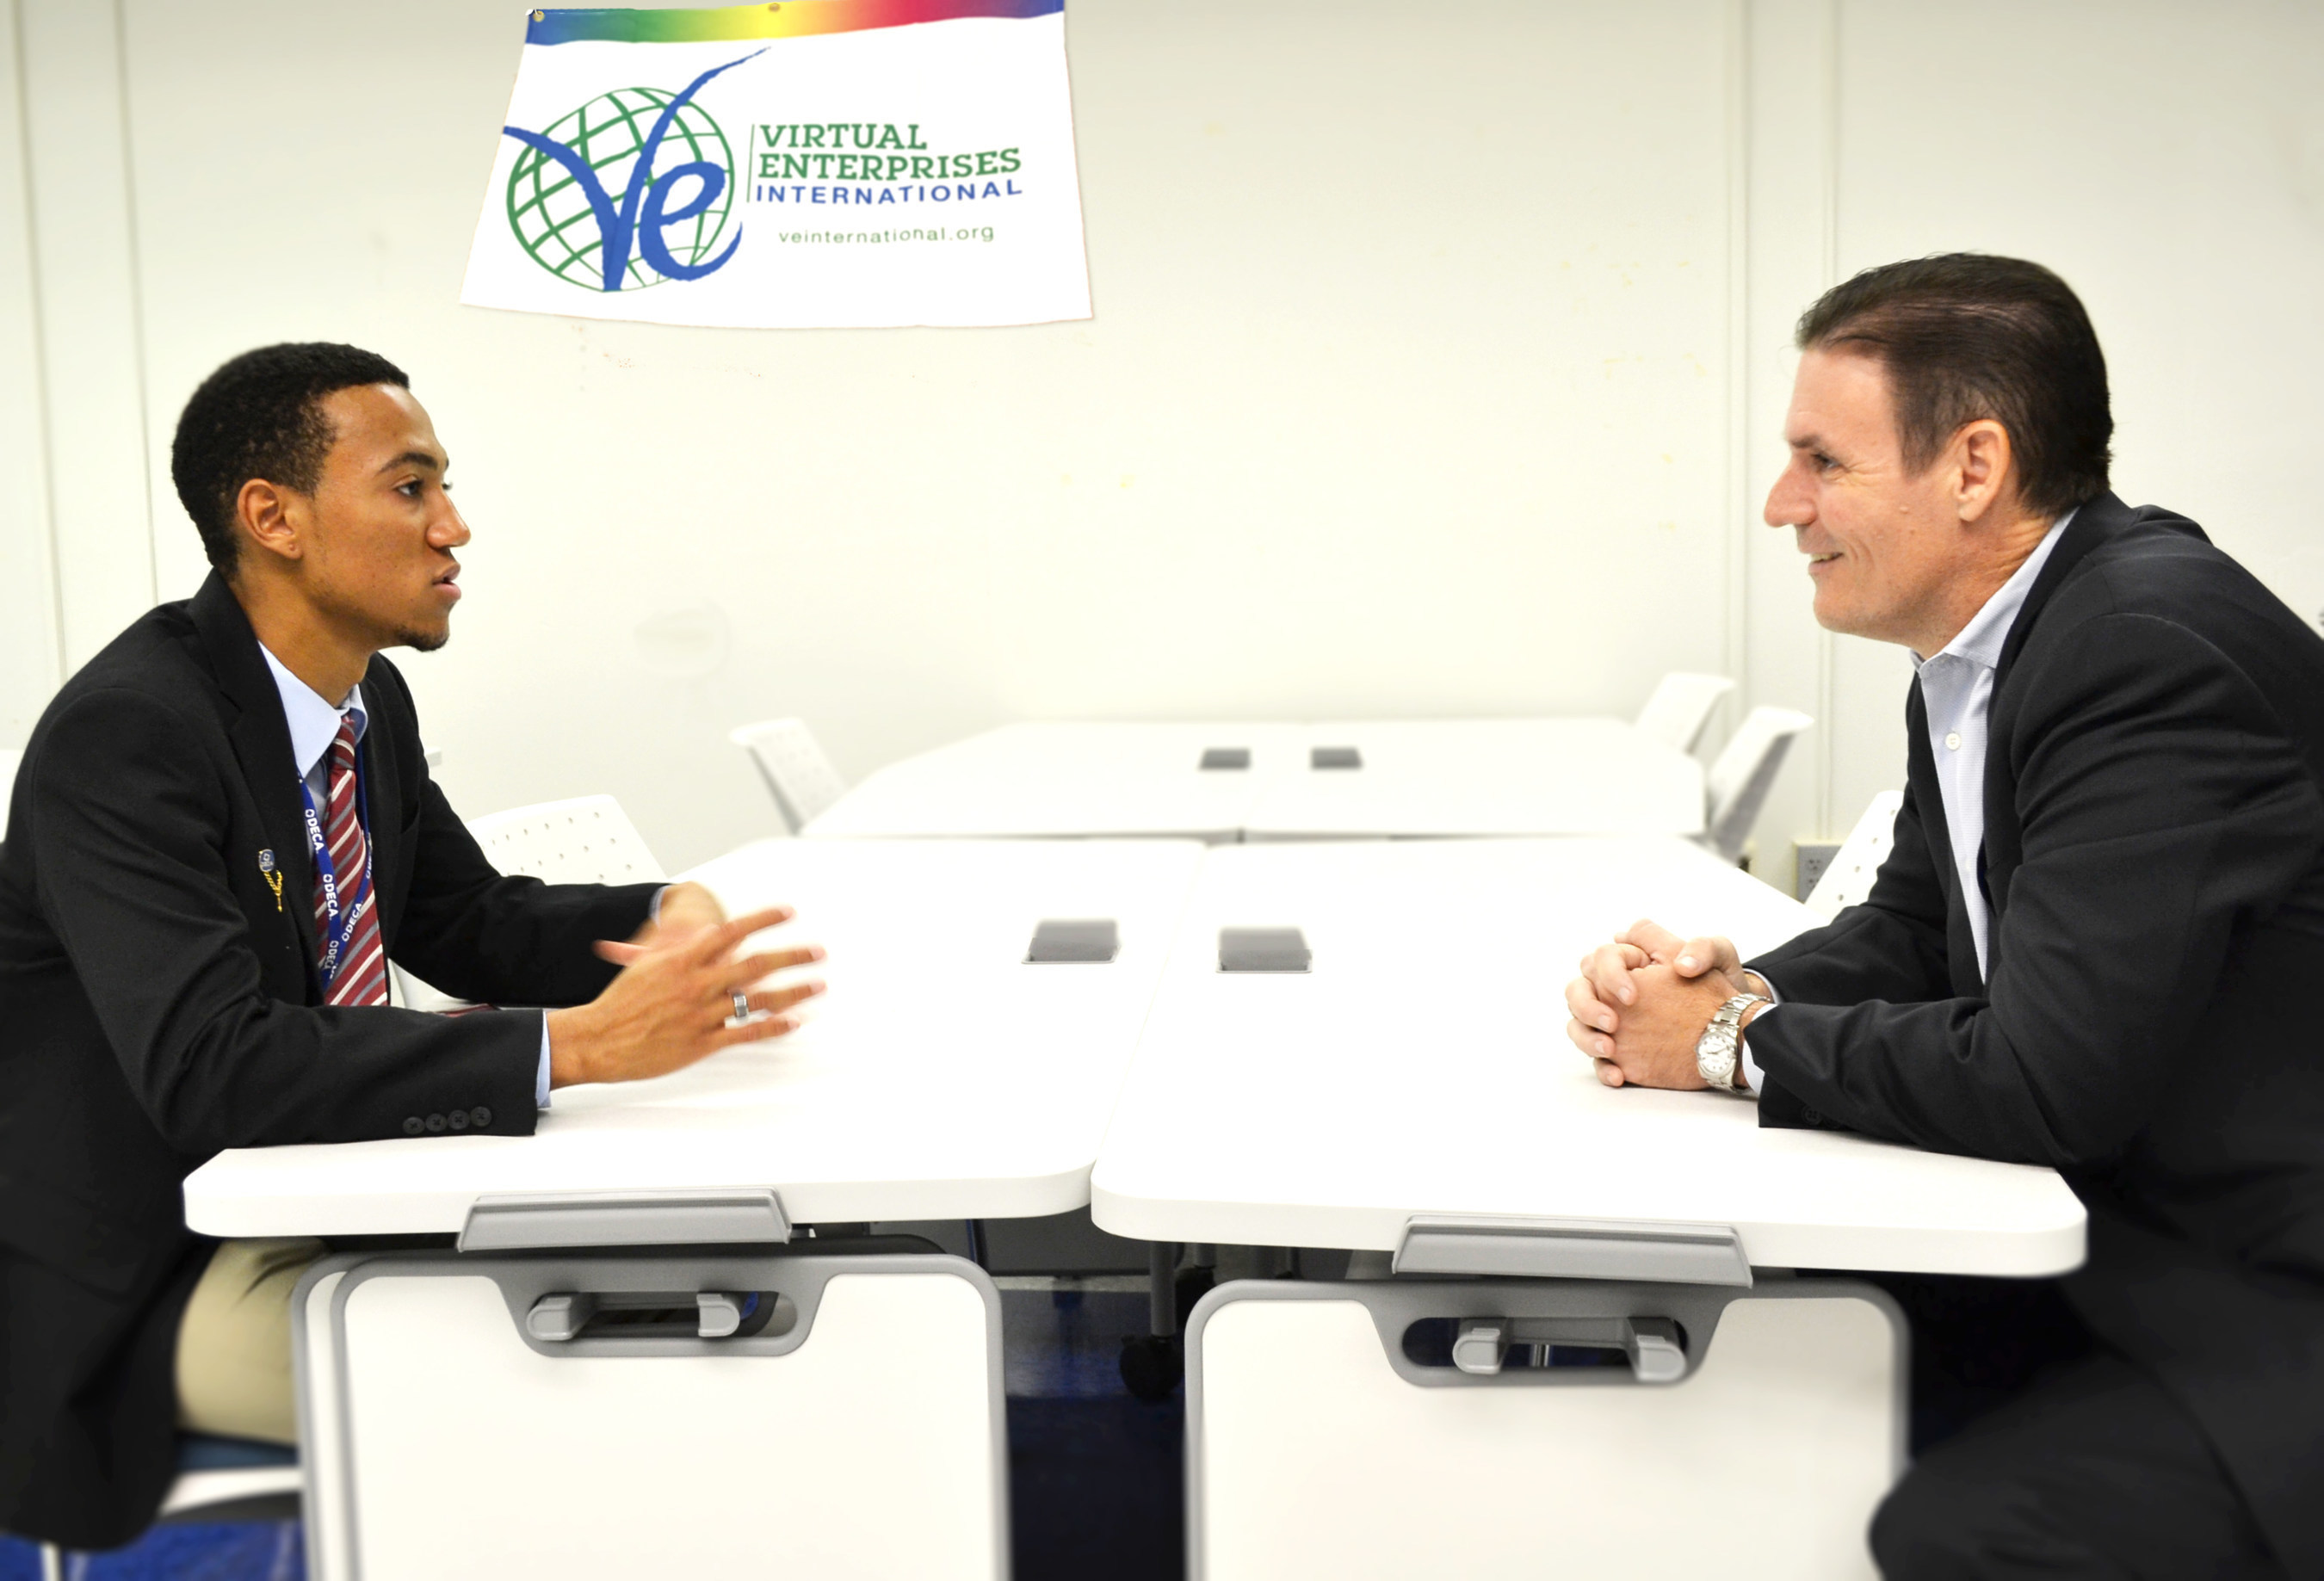 Digital Risk Co-founder & Managing Partner Jeff Taylor interviewing J.P. Taravella High School student Aaron Mitchell, newly elected CEO of the school's VEI program.